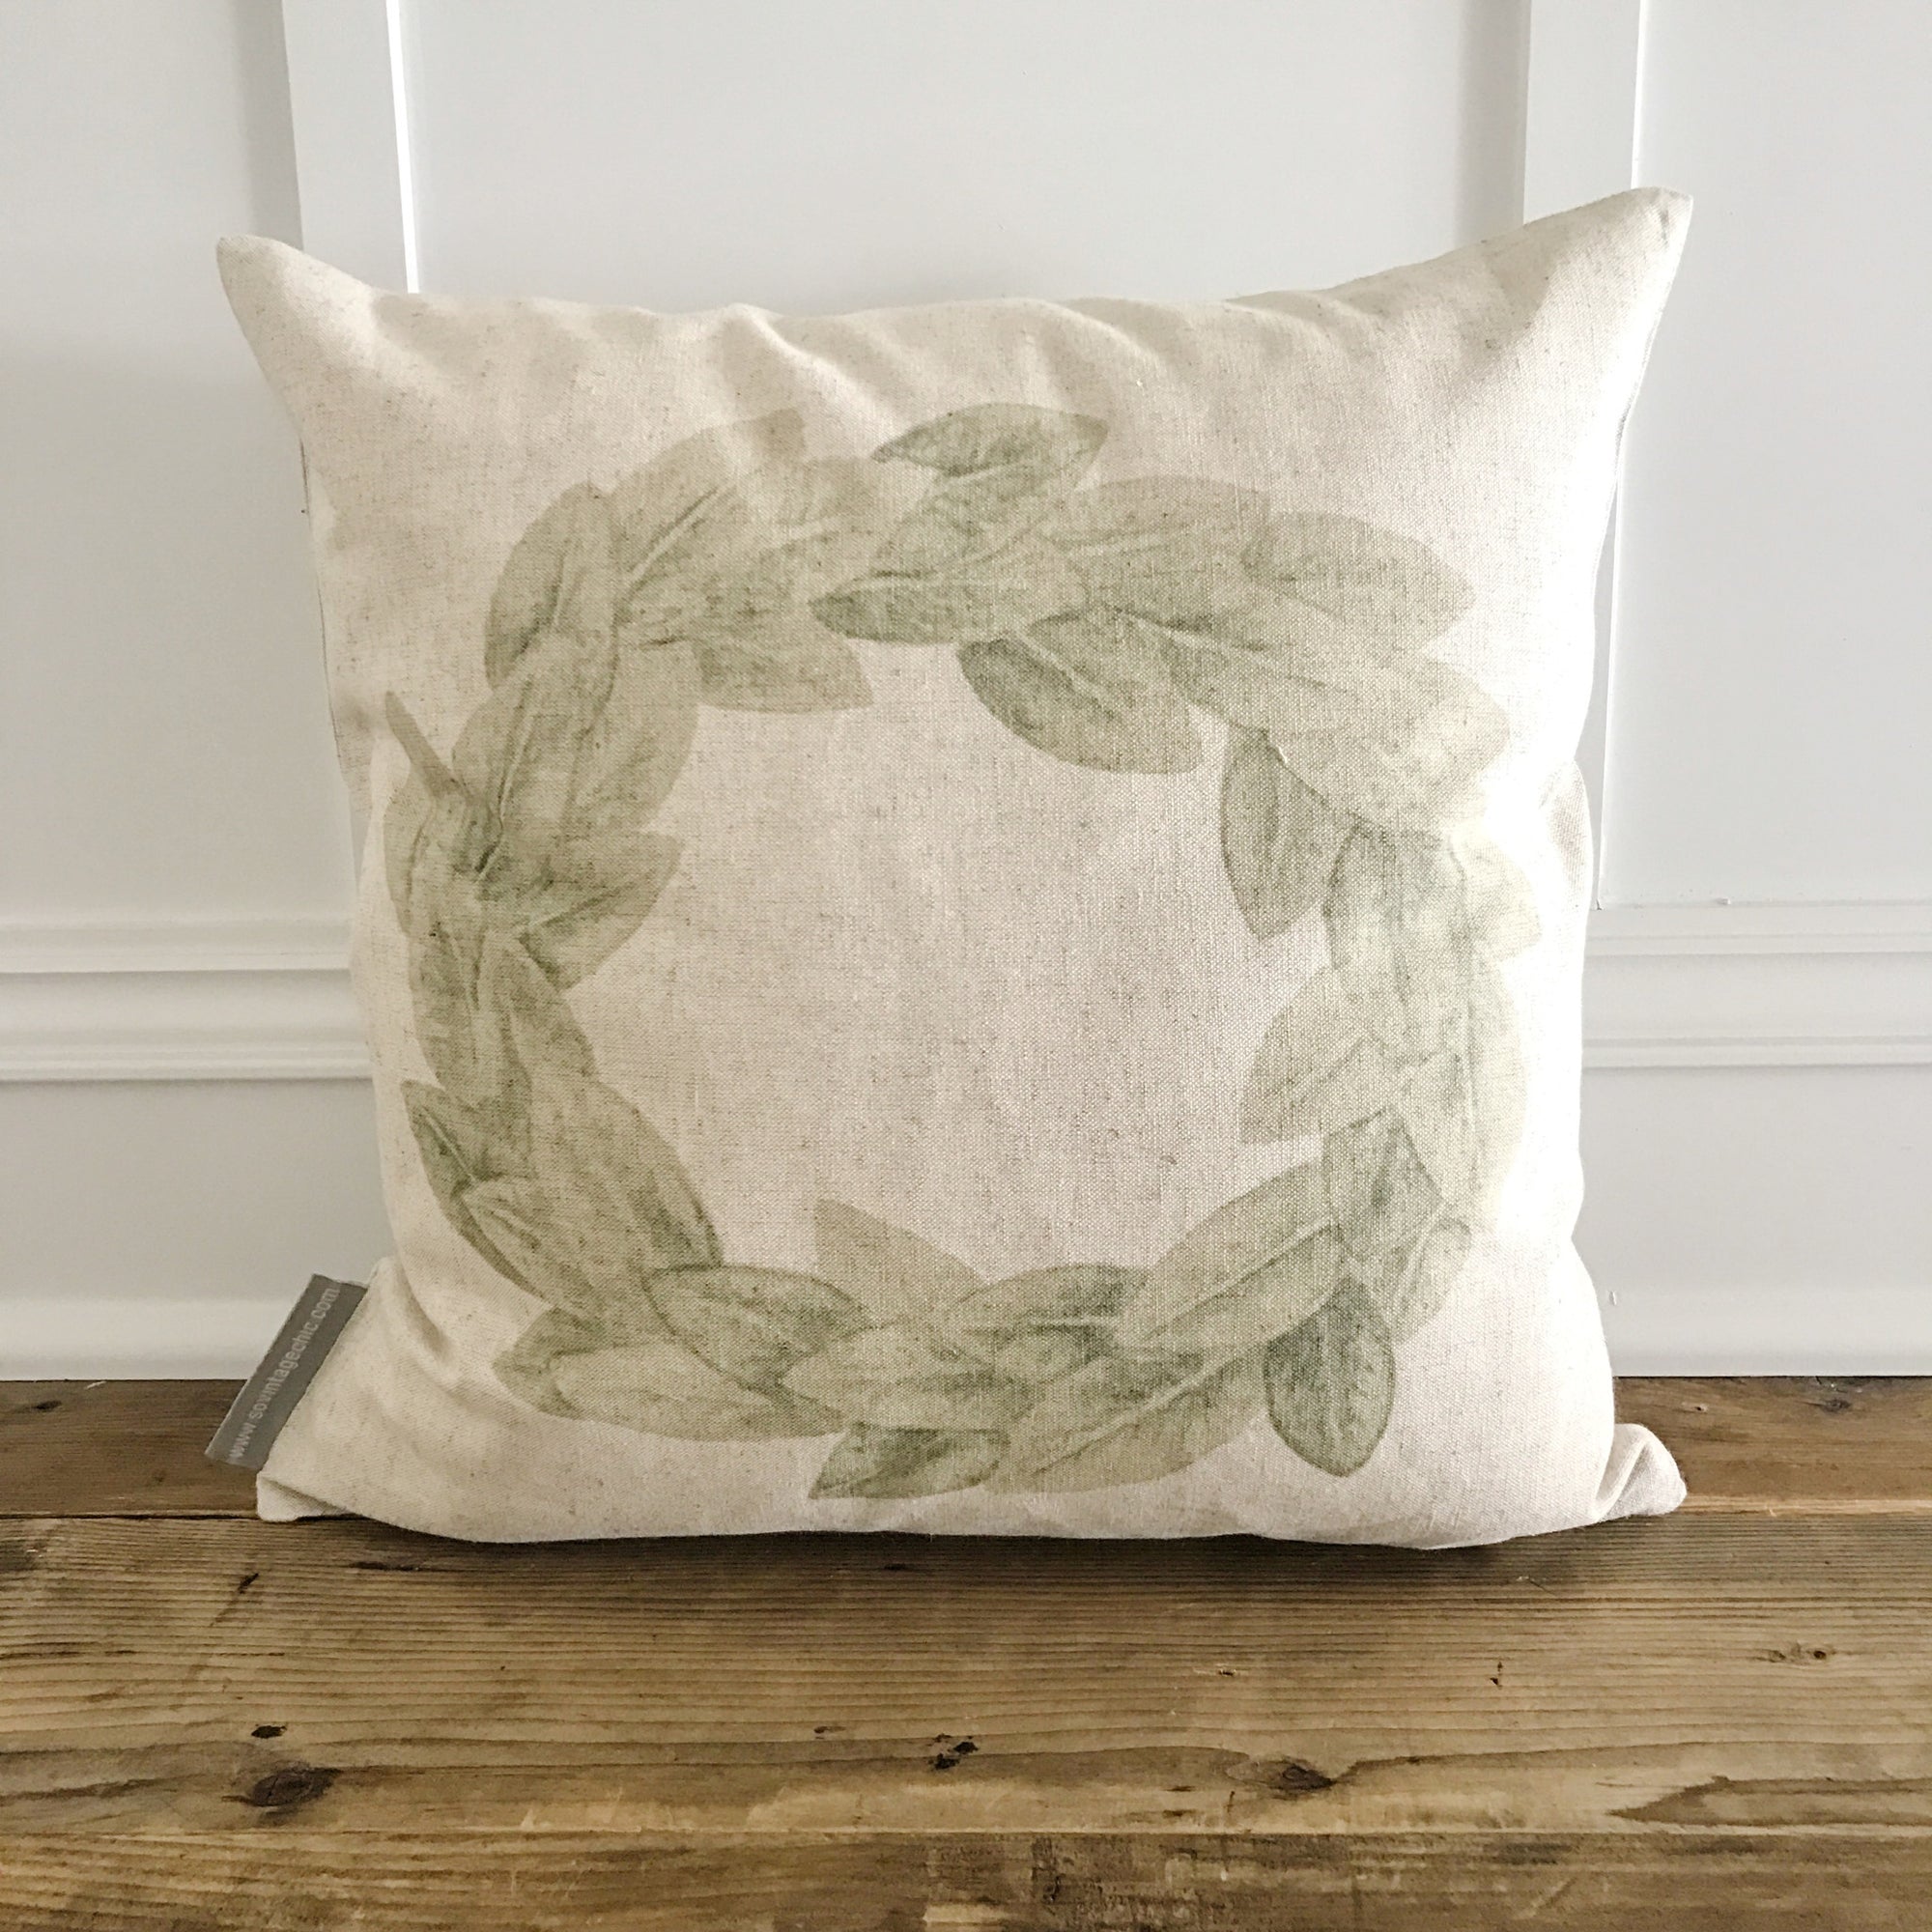 Magnolia Wreath Pillow Cover - Linen and Ivory